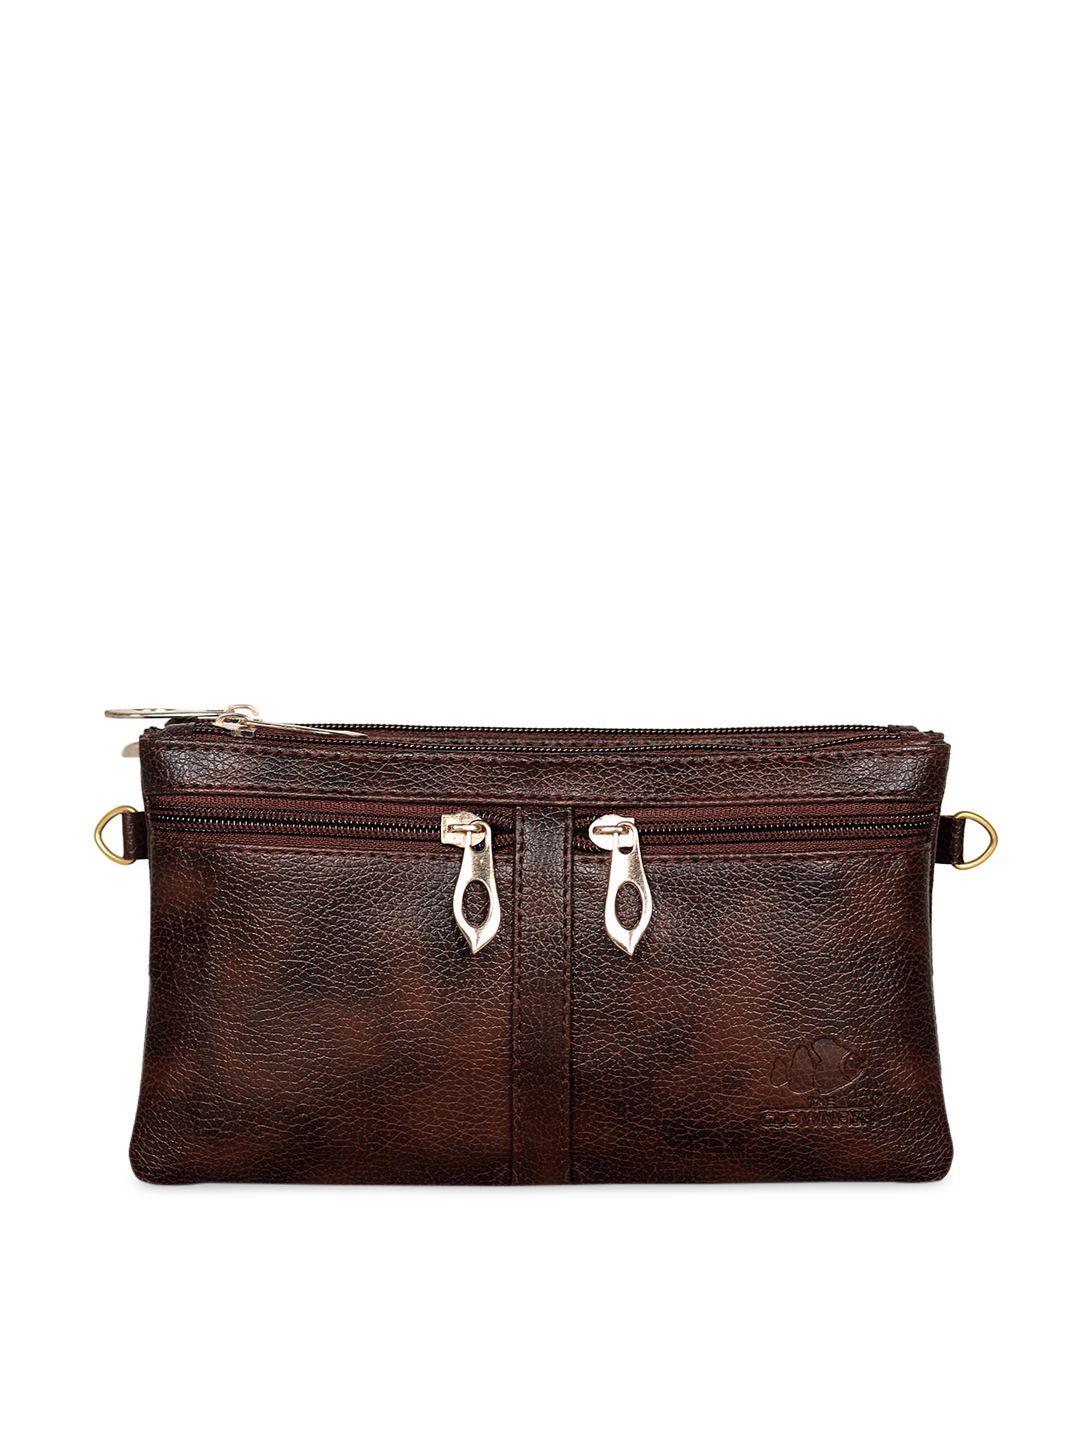 the clownfish brown textured leather purse